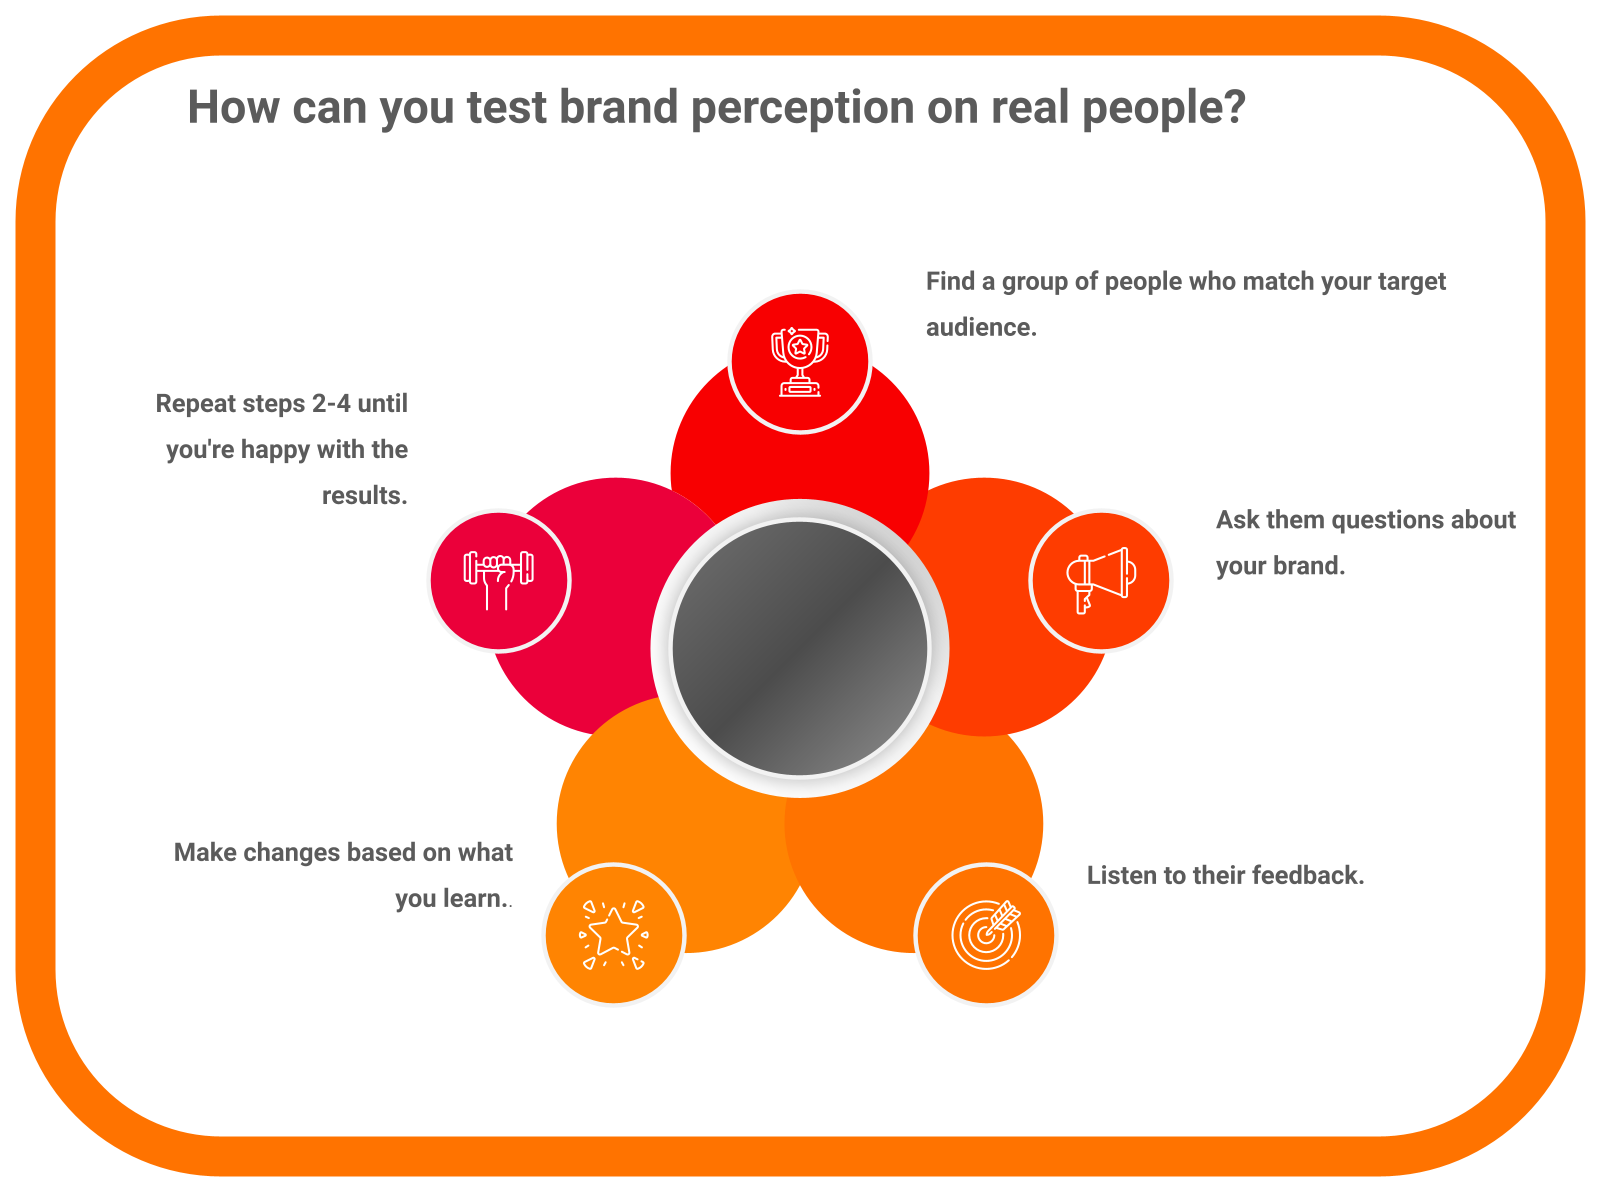 How can you test brand perception on real people?